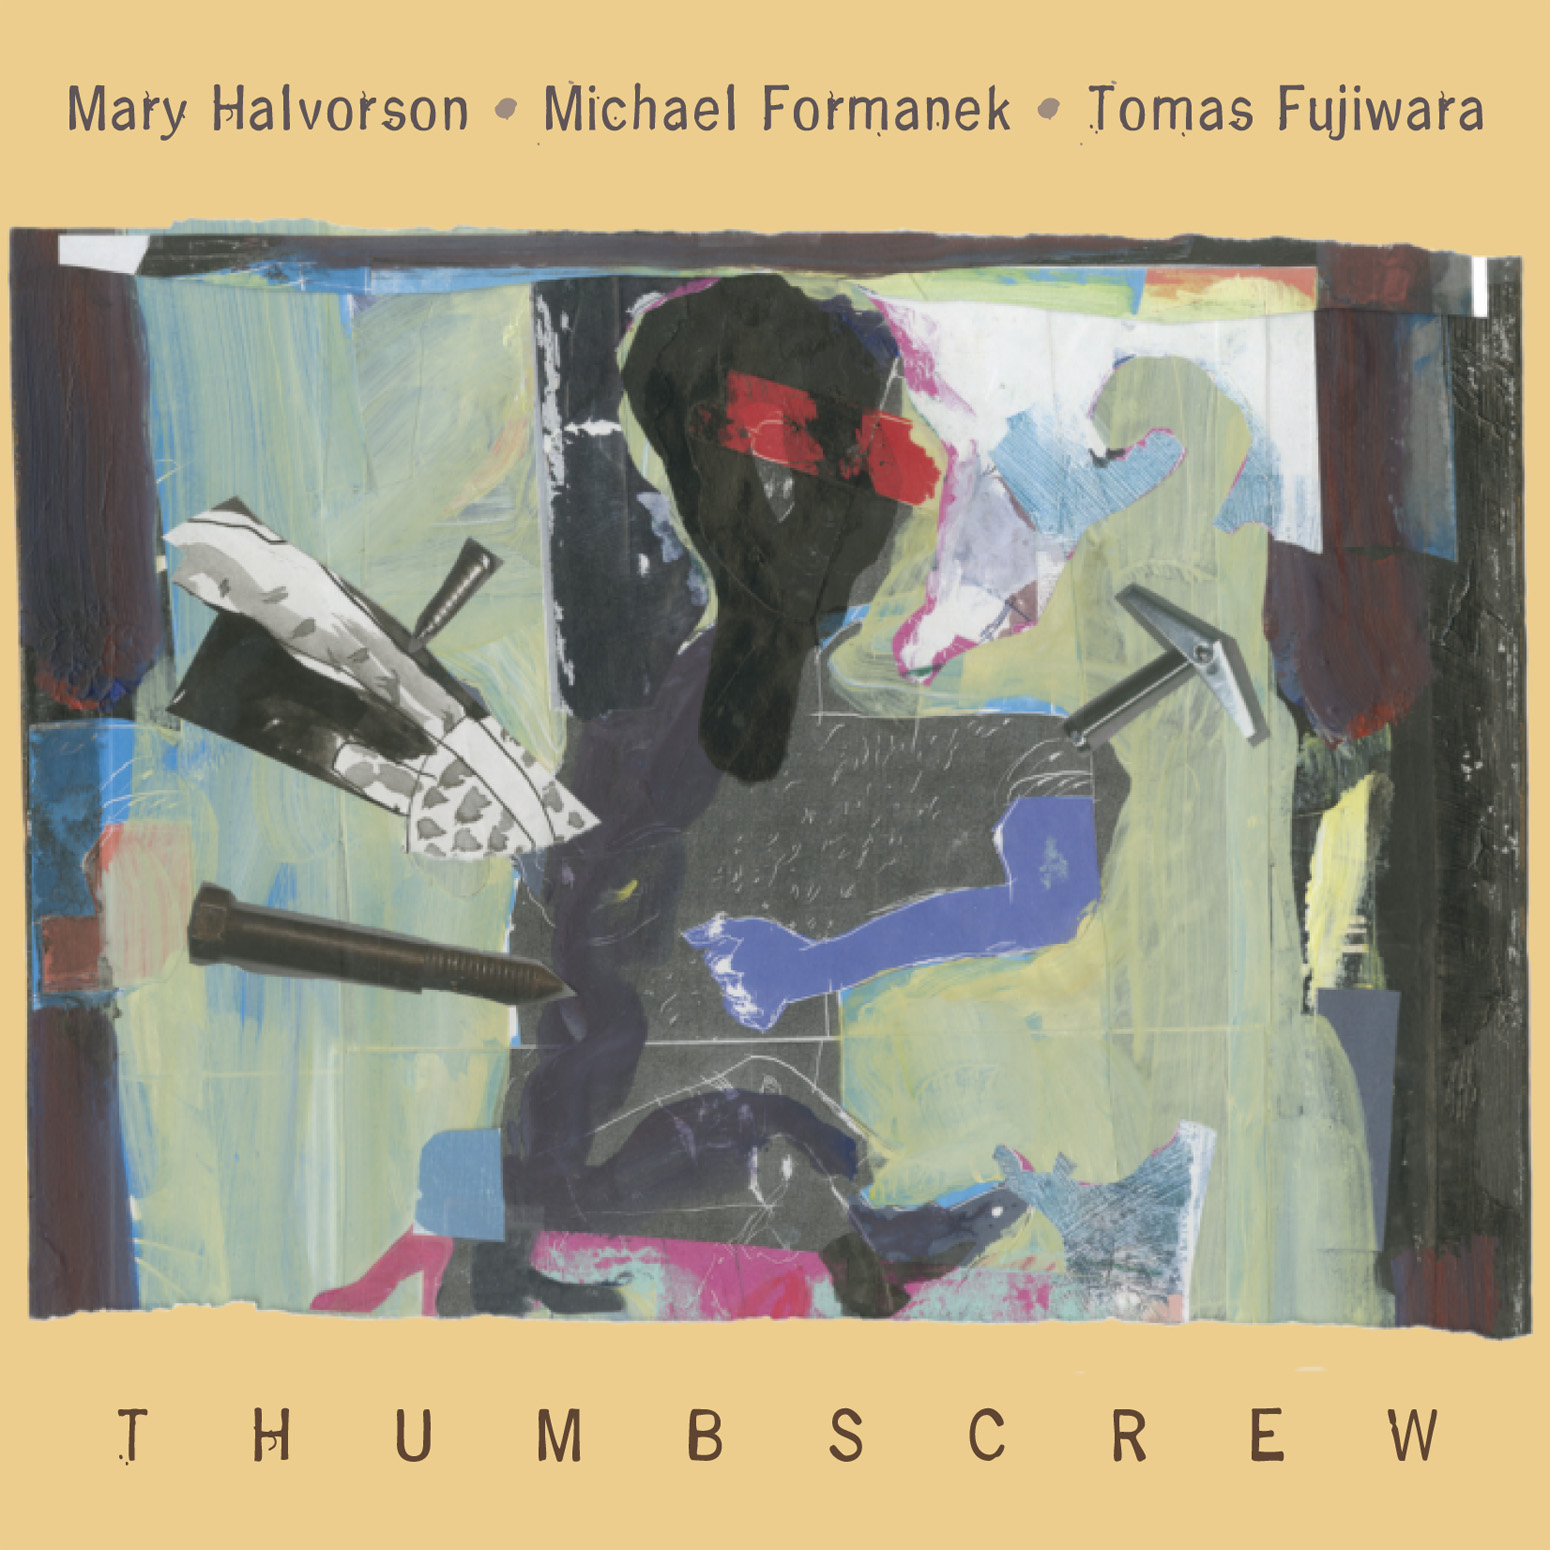 Debut from 'Thumbscrew' Showcases Exciting Trio of Equals